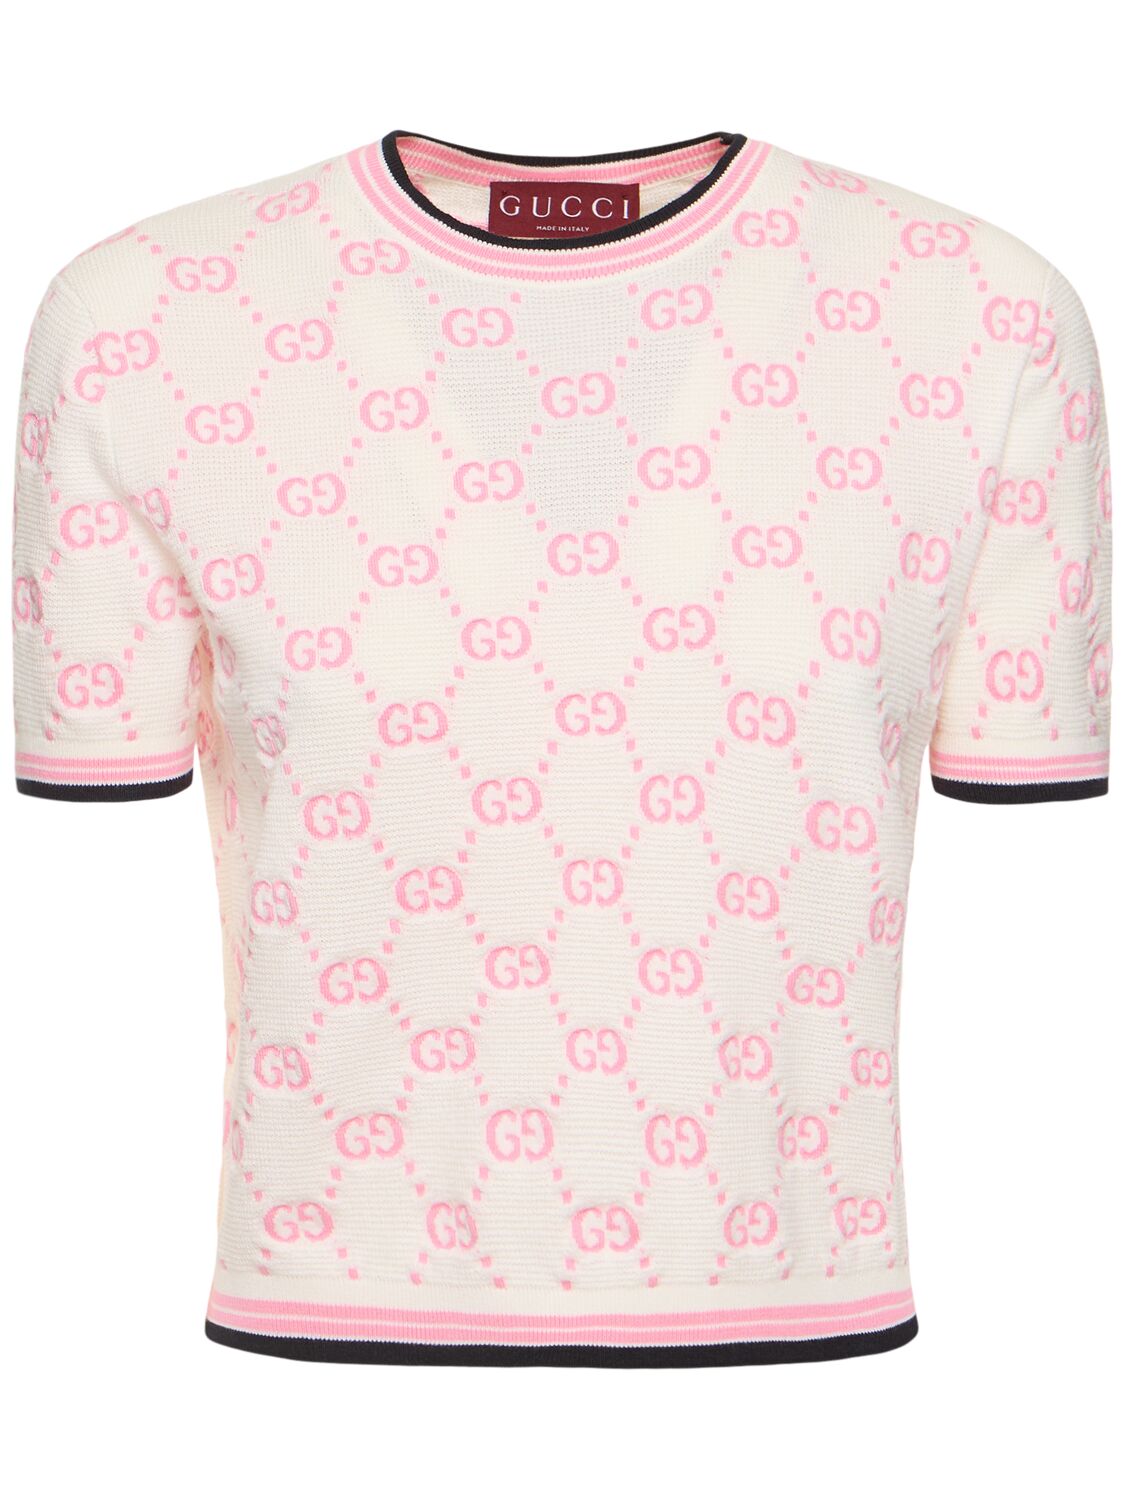 Gucci Gg Cotton Top In Pink